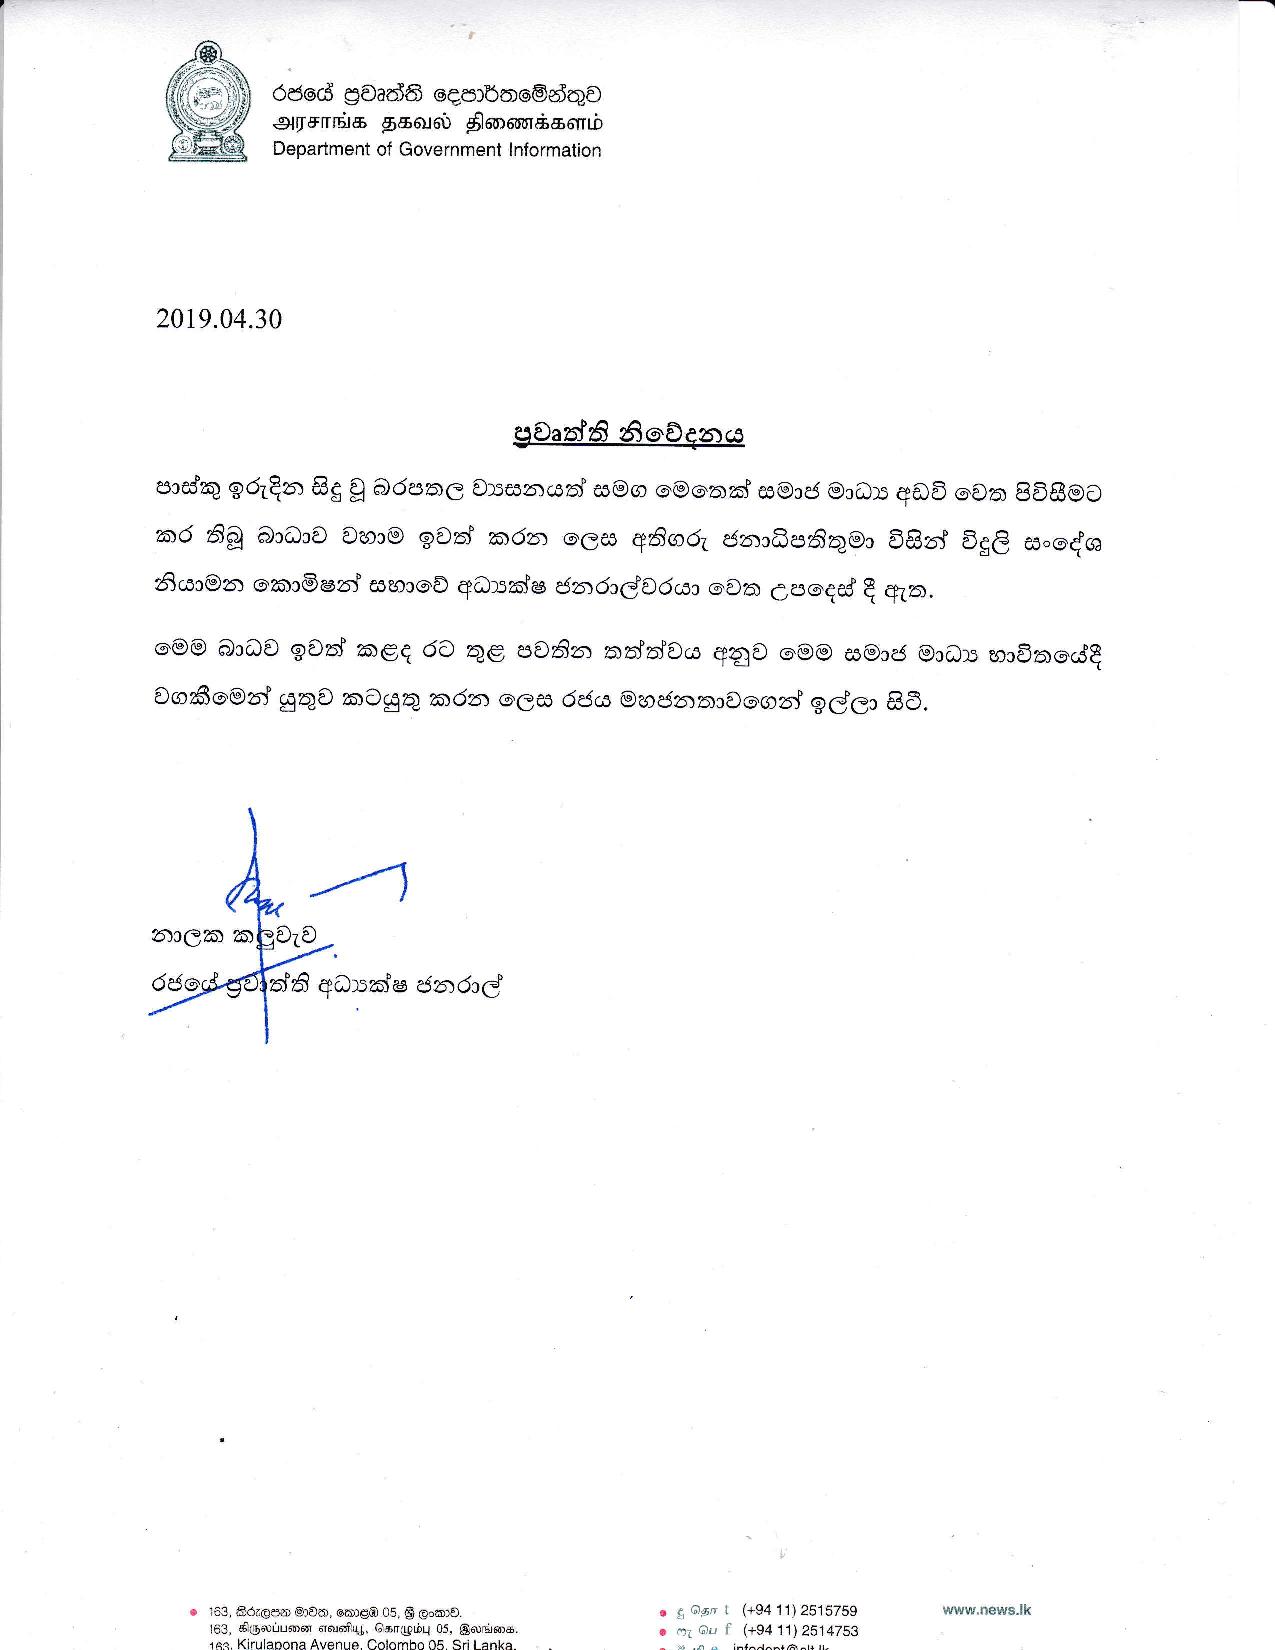 Media Release on 30.04.2019 page 001